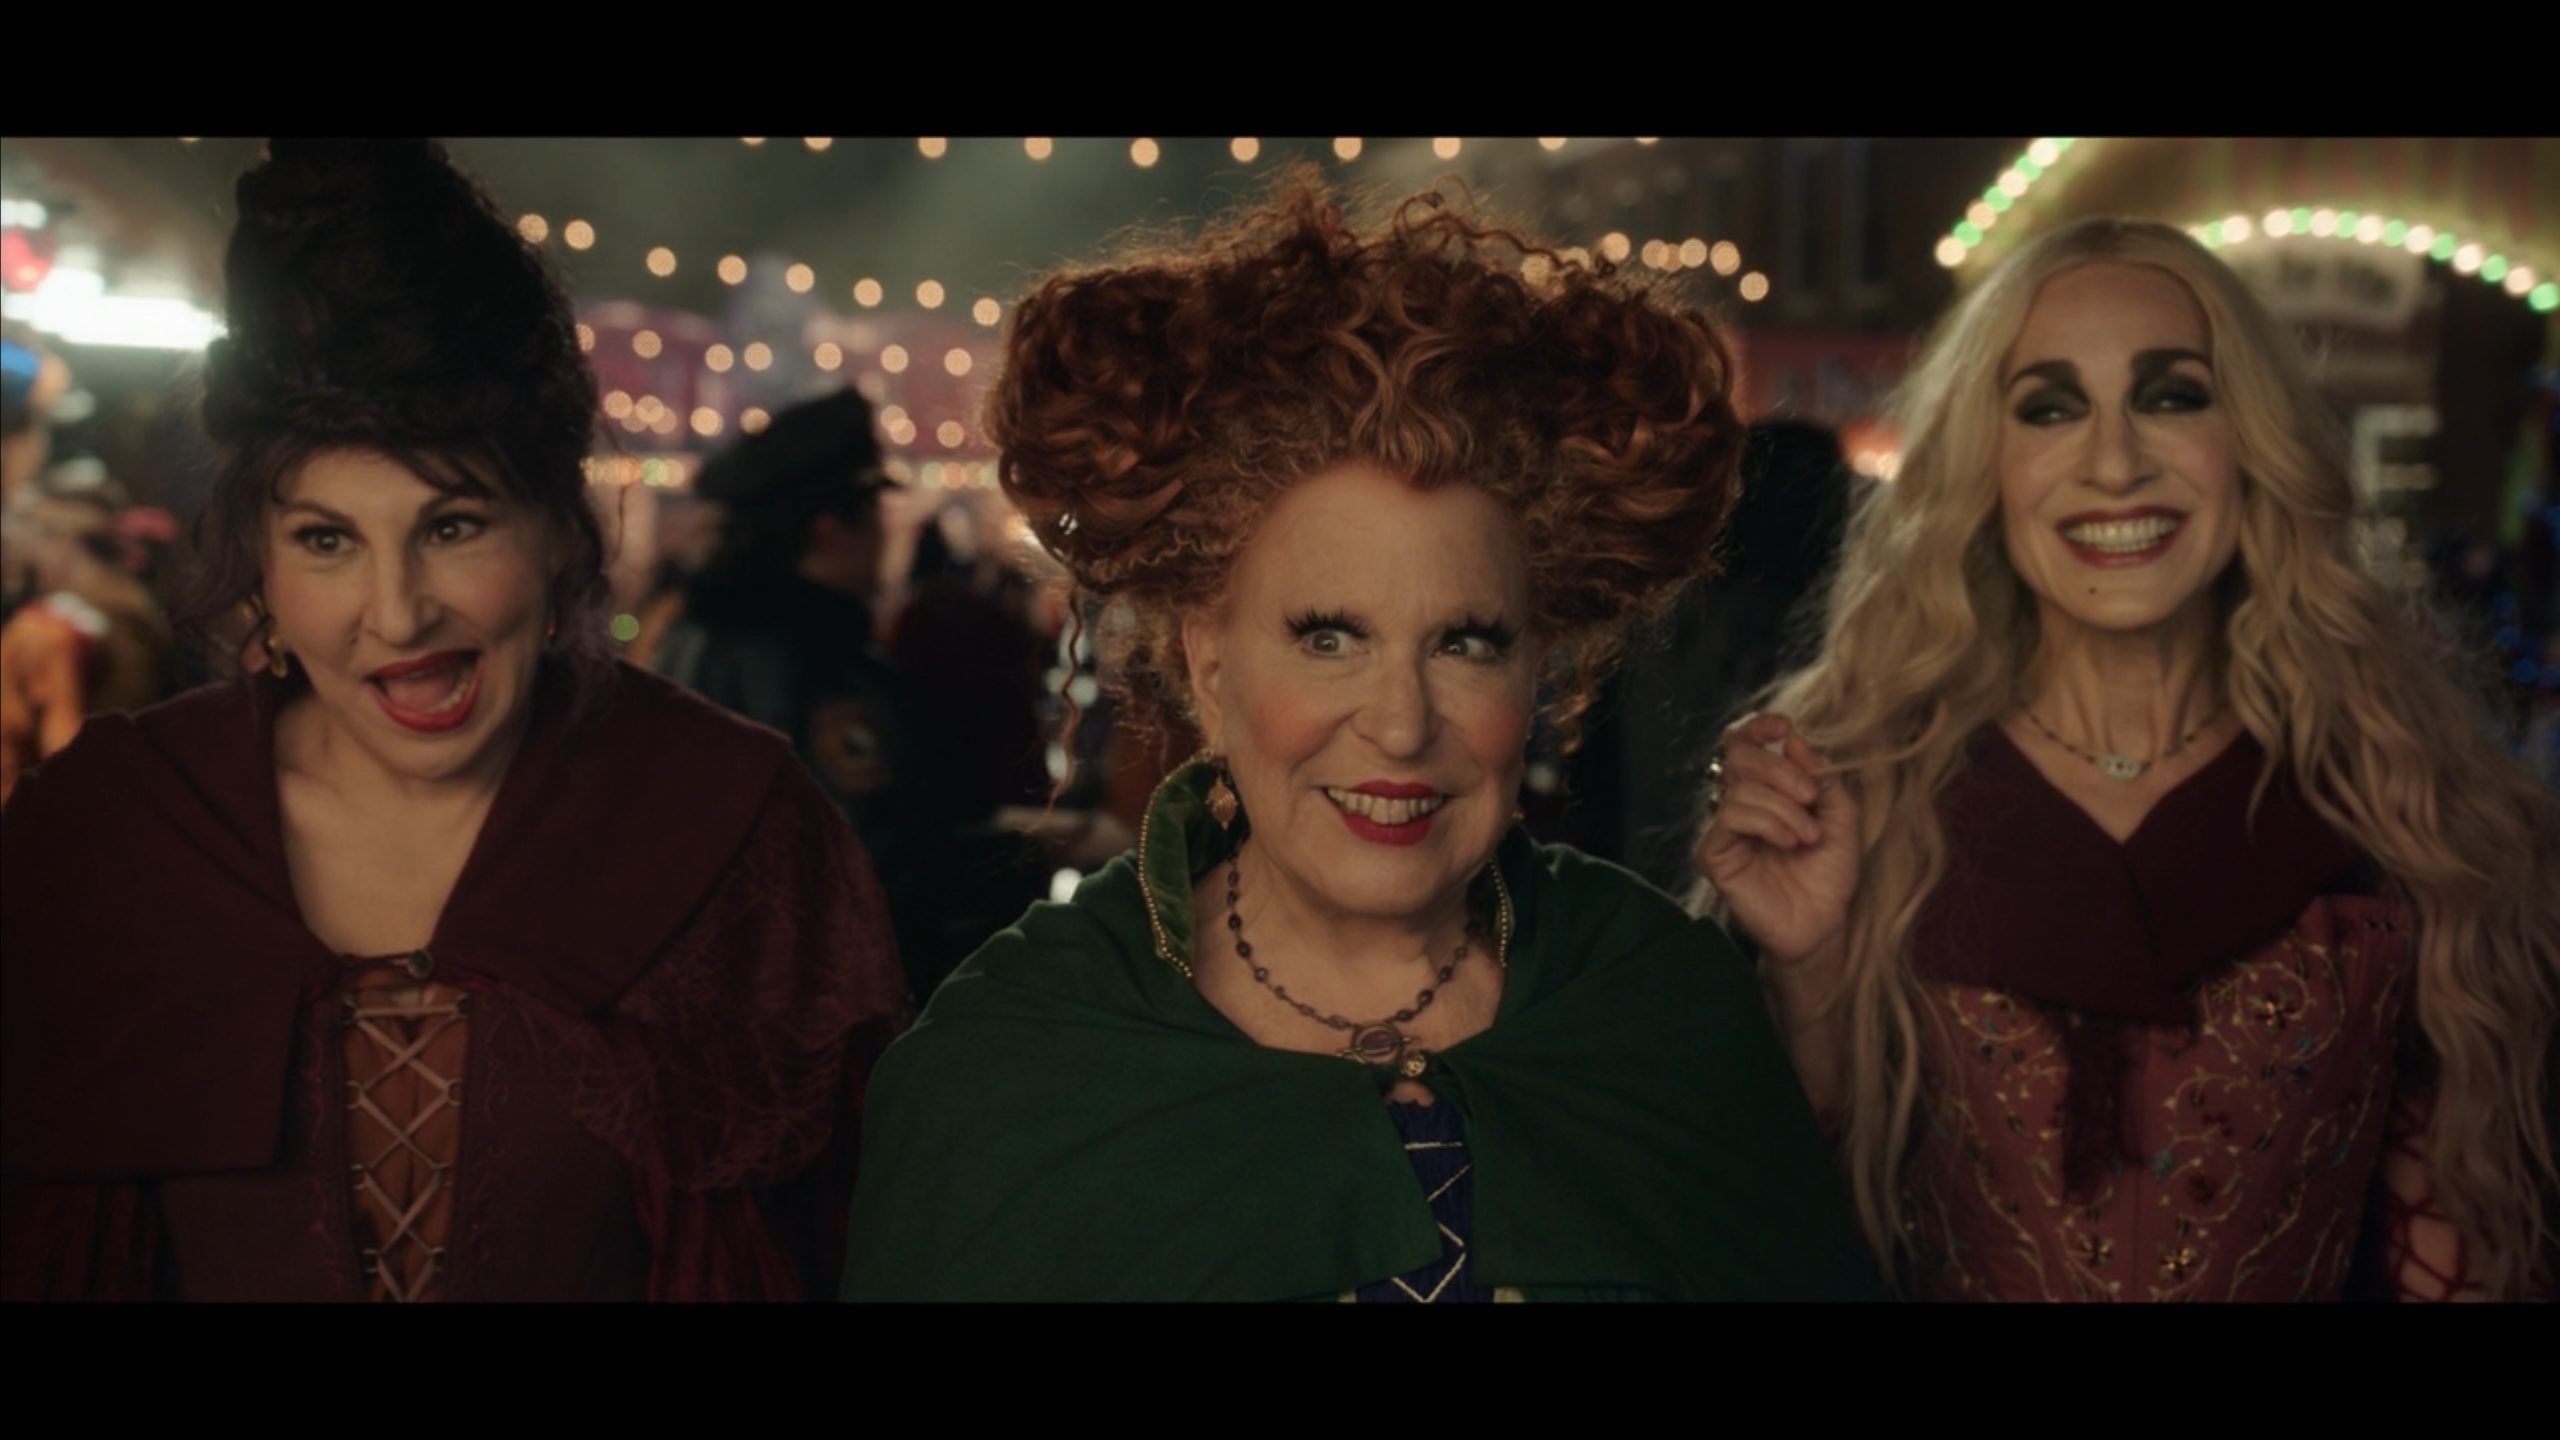 Sarah (Sarah Jessica Parker), Winifred (Bette Midler) and Mary (Kathy Najimy) making it clear they are always ready to go on stage